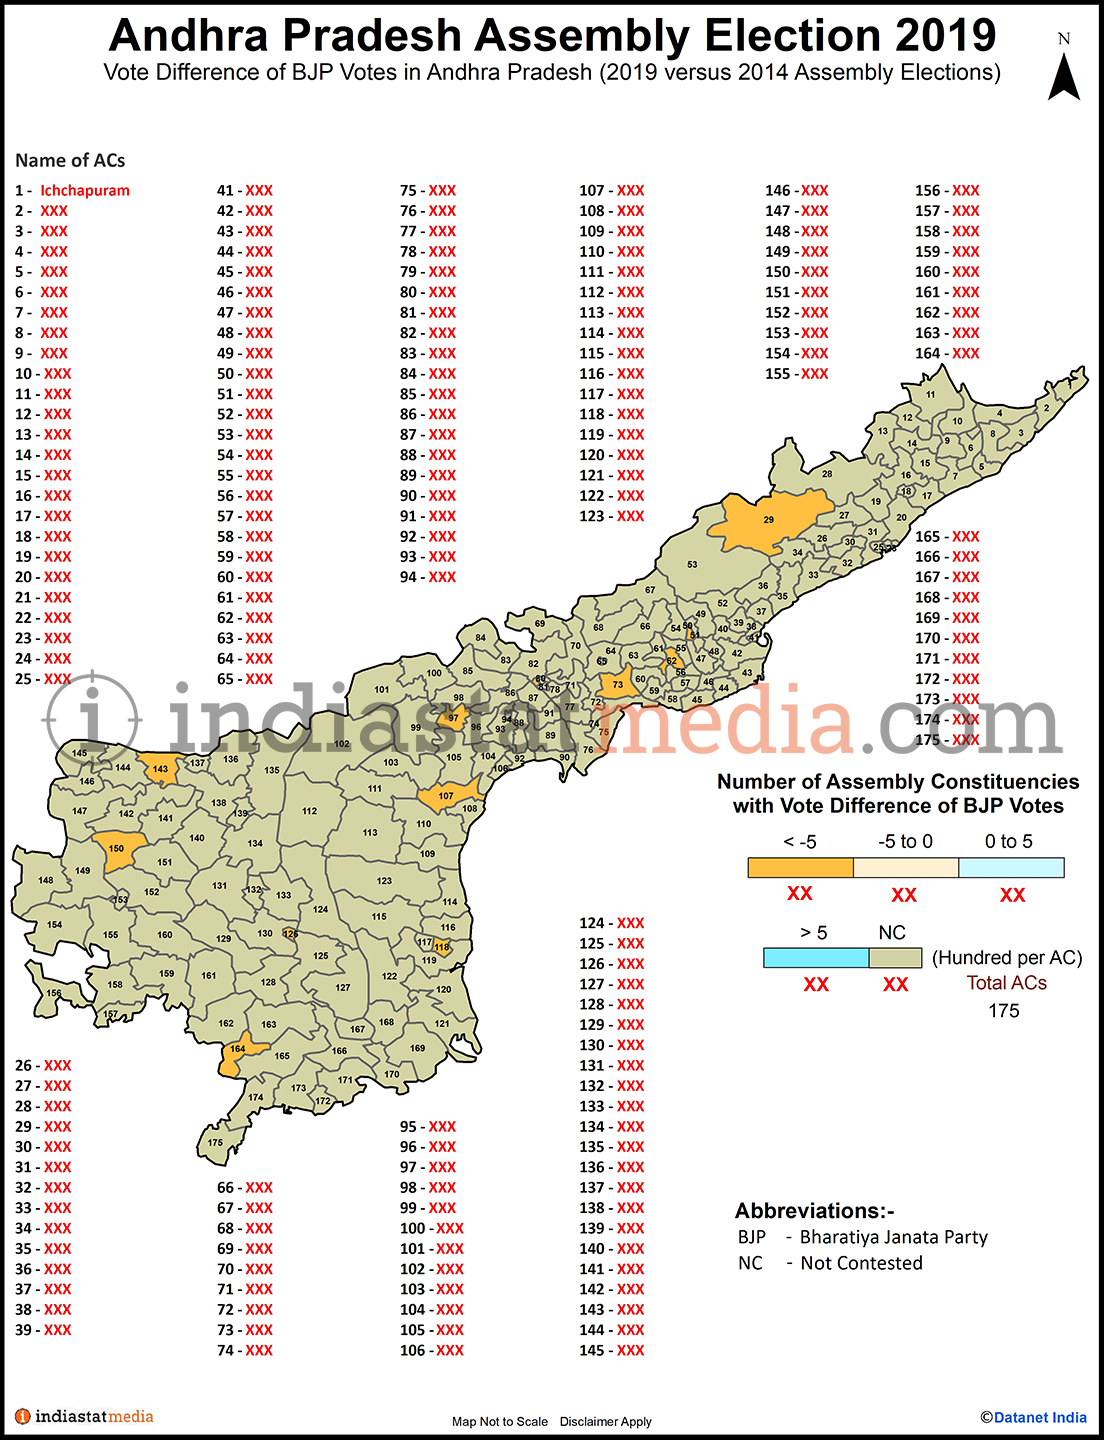 Assembly Constituencies with Vote Difference of BJP Votes in Andhra Pradesh (Assembly Elections - 2014 & 2019)